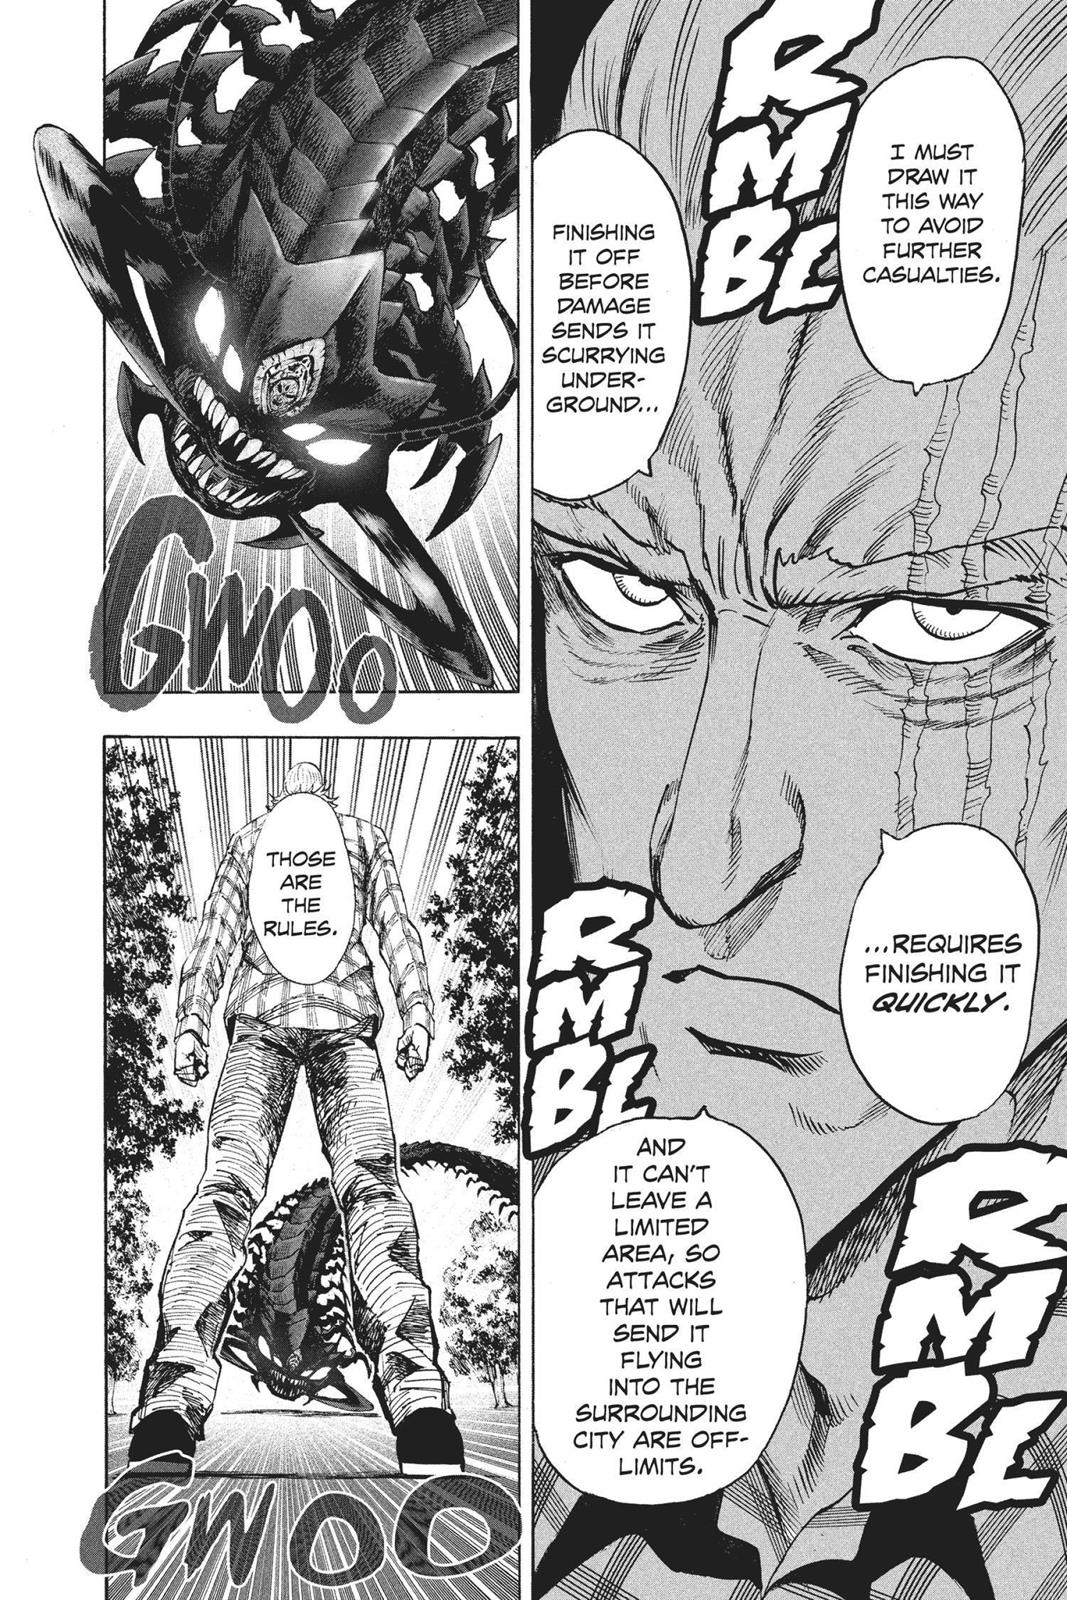 One-Punch Man, Punch 85 image 102